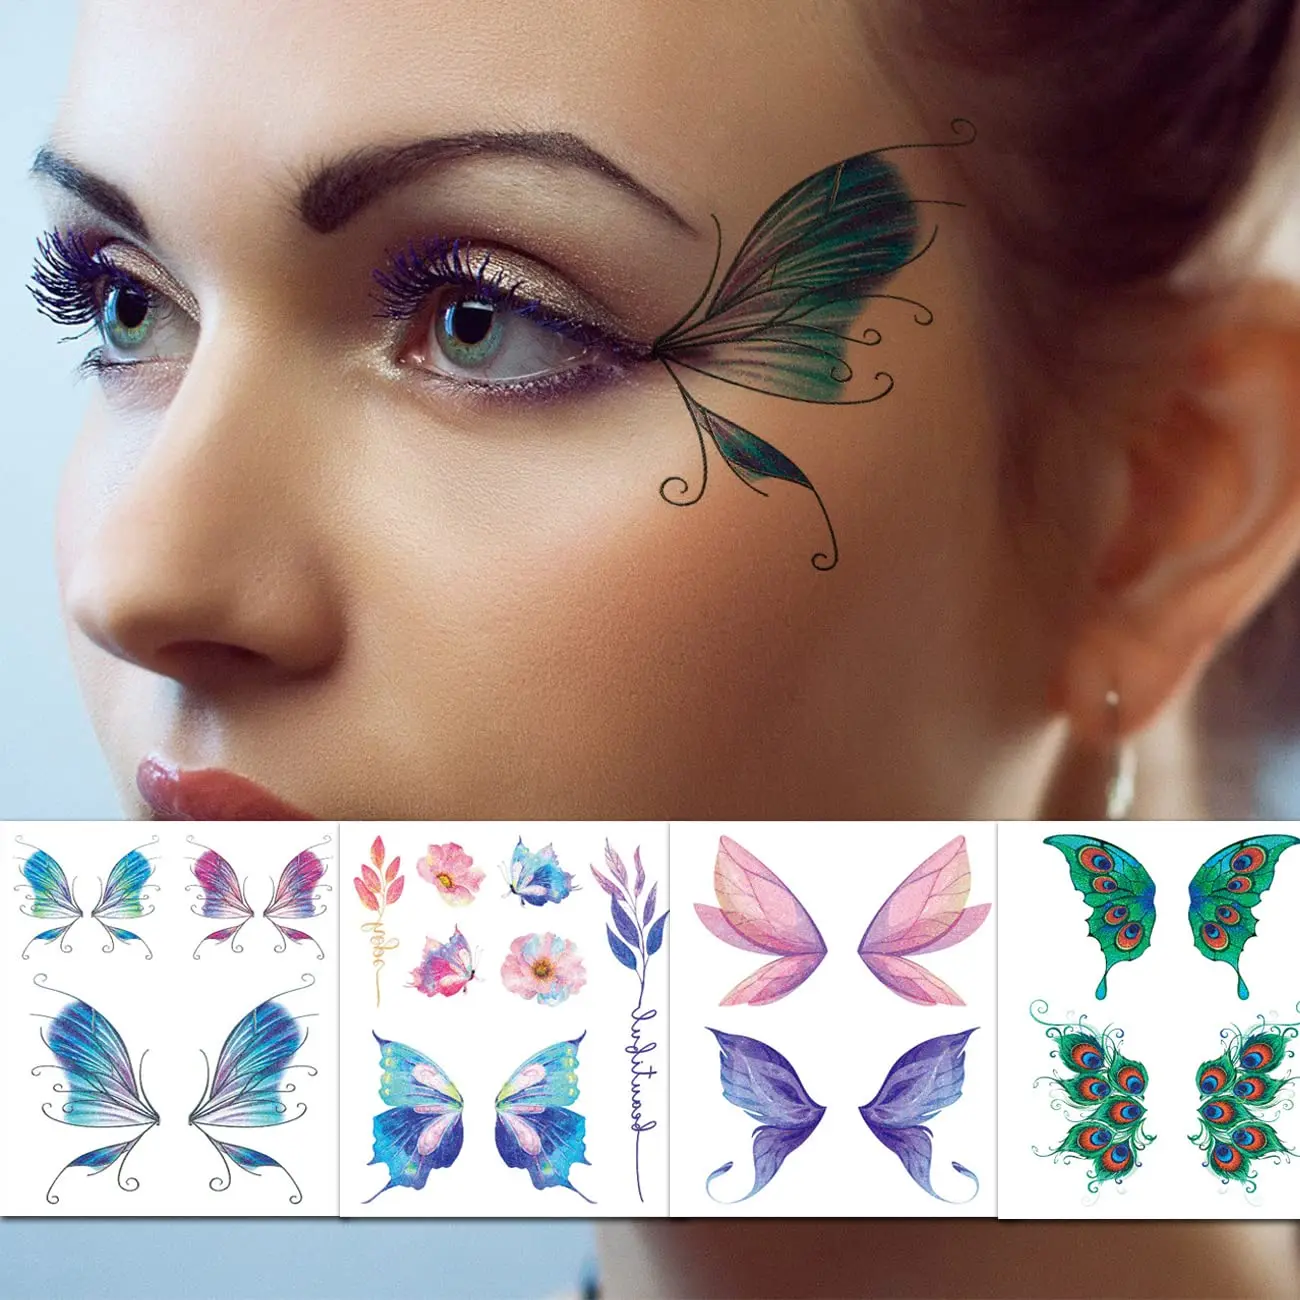 12 Sheets Butterfly Tattoos Temporary for Kids Women Eyes Make Up Galaxy Waterproof Face Tattoo Stickers for Party Favors Gifts